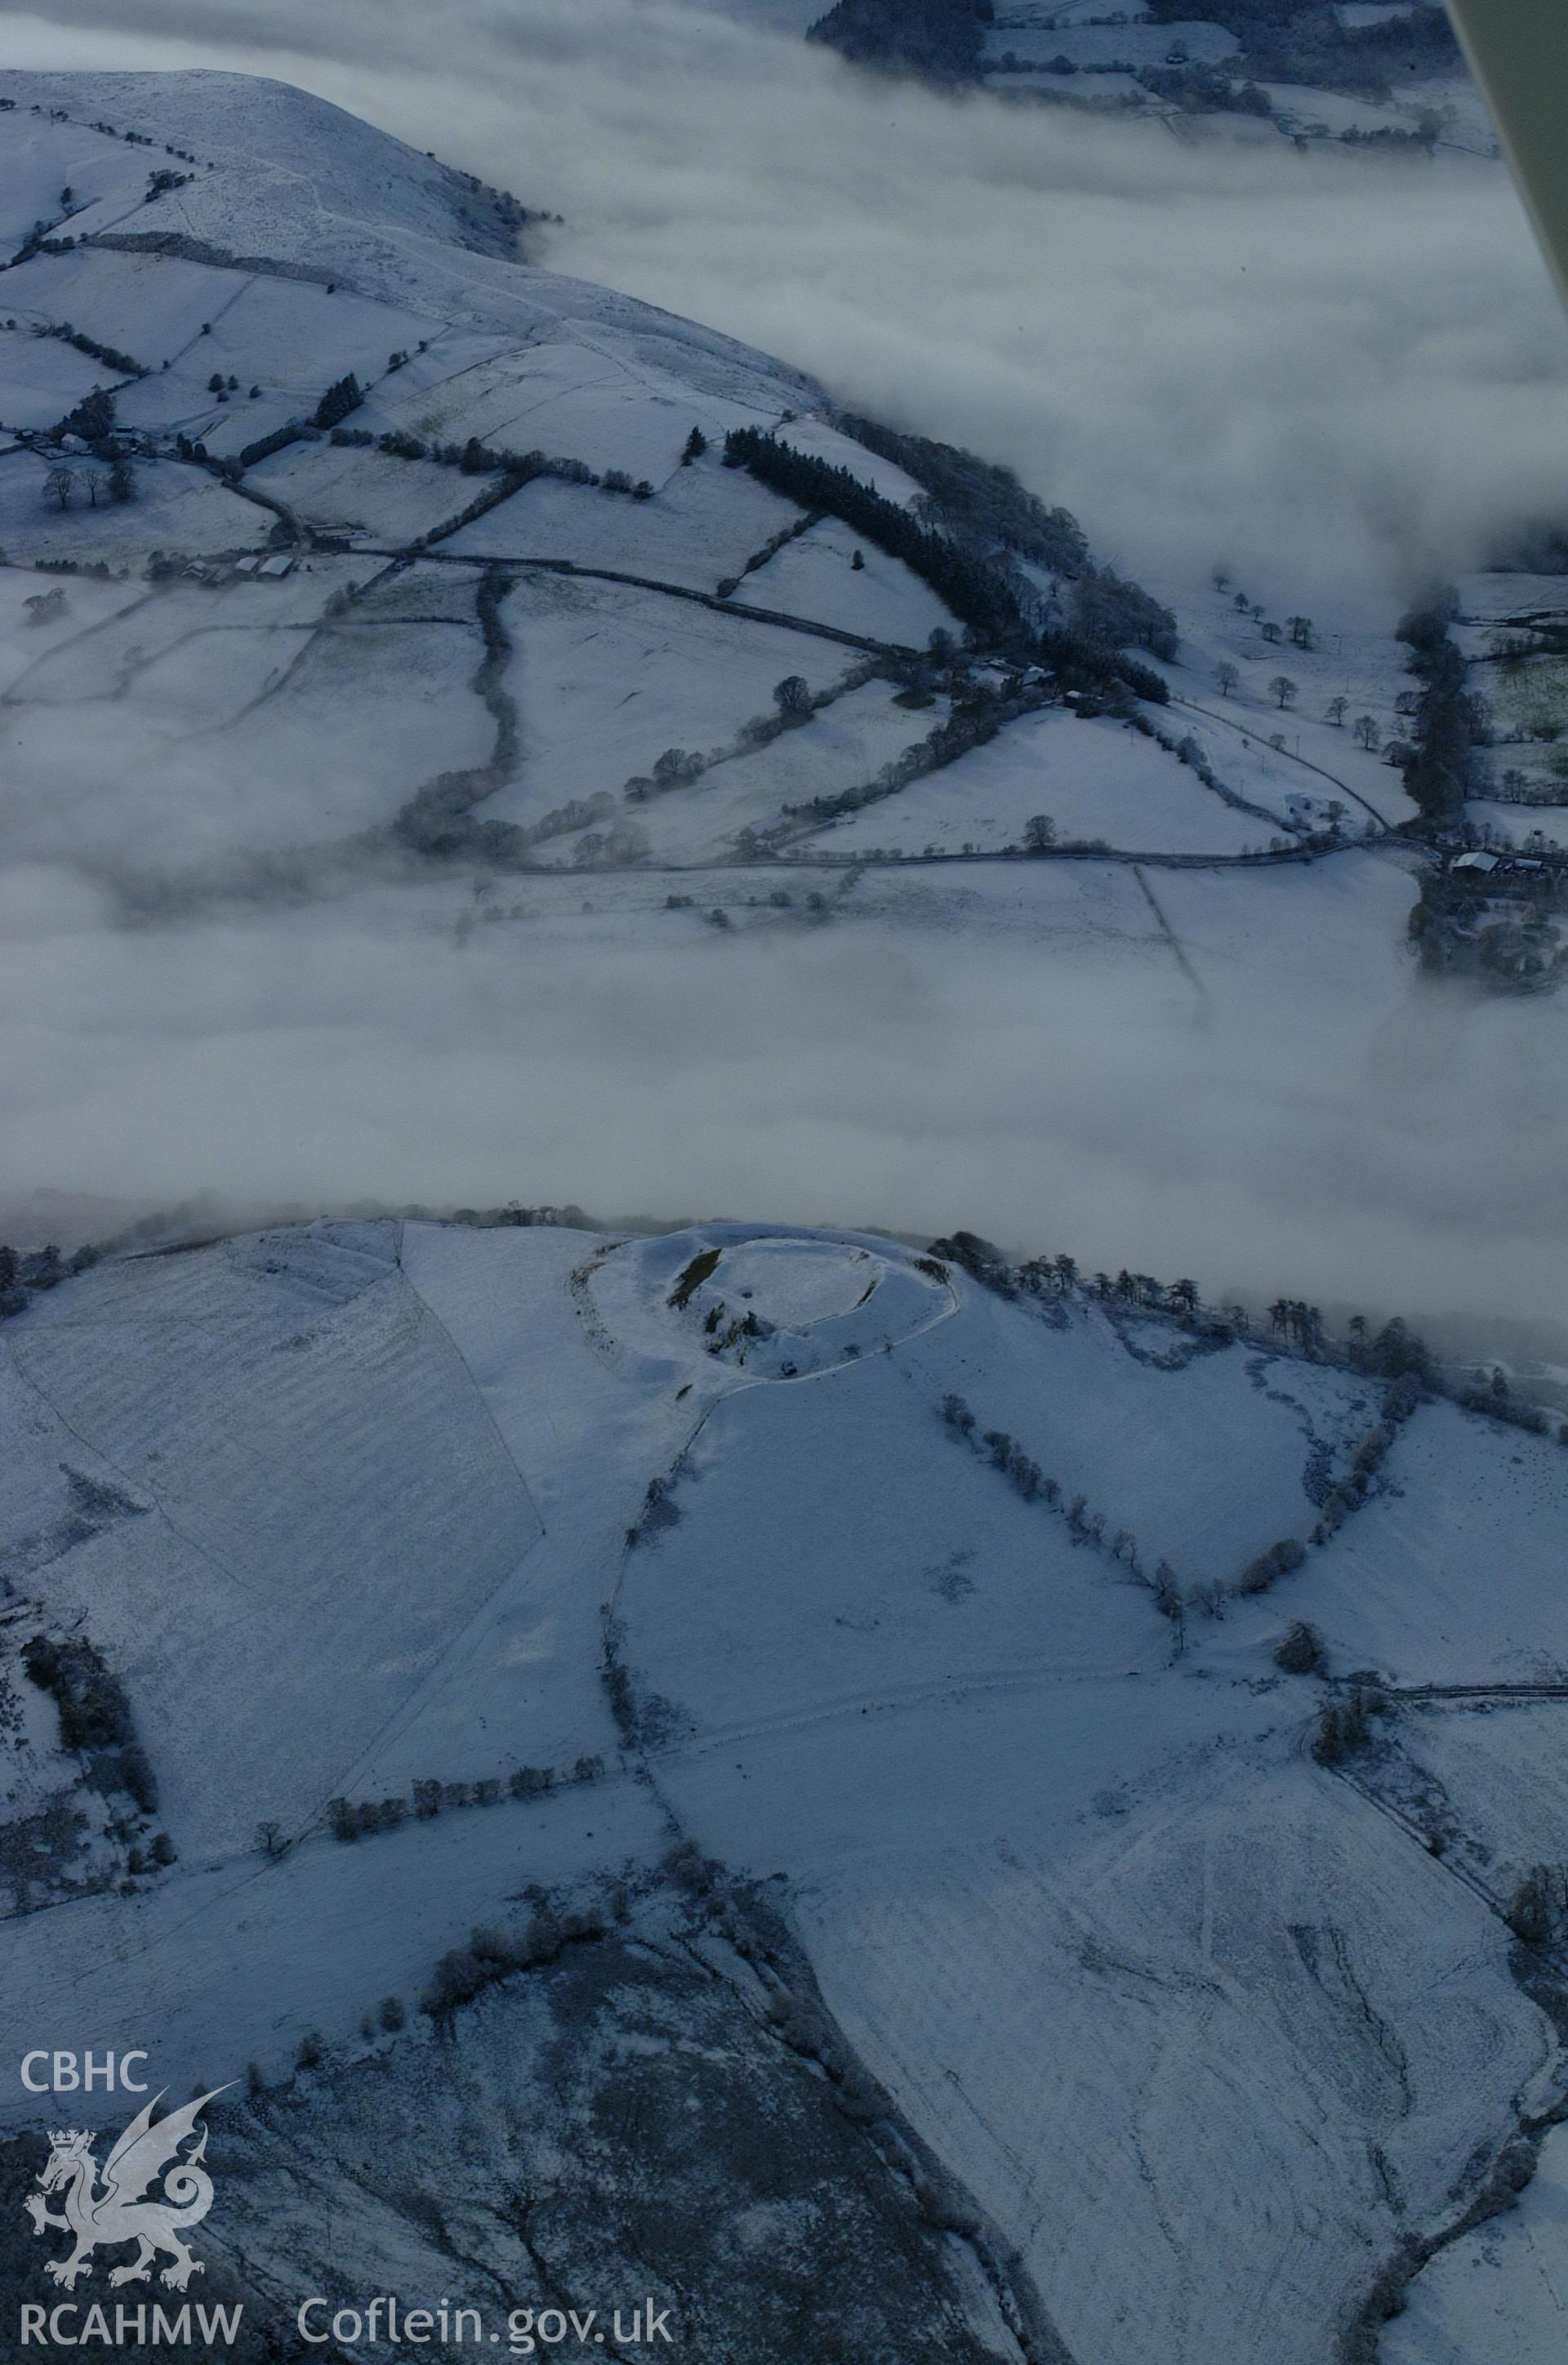 RCAHMW colour oblique aerial photograph of Castell Tinboeth, Llananno. A view from the north-east showing the site under snow with freezing fog in the valleys. Taken on 19 November 2004 by Toby Driver